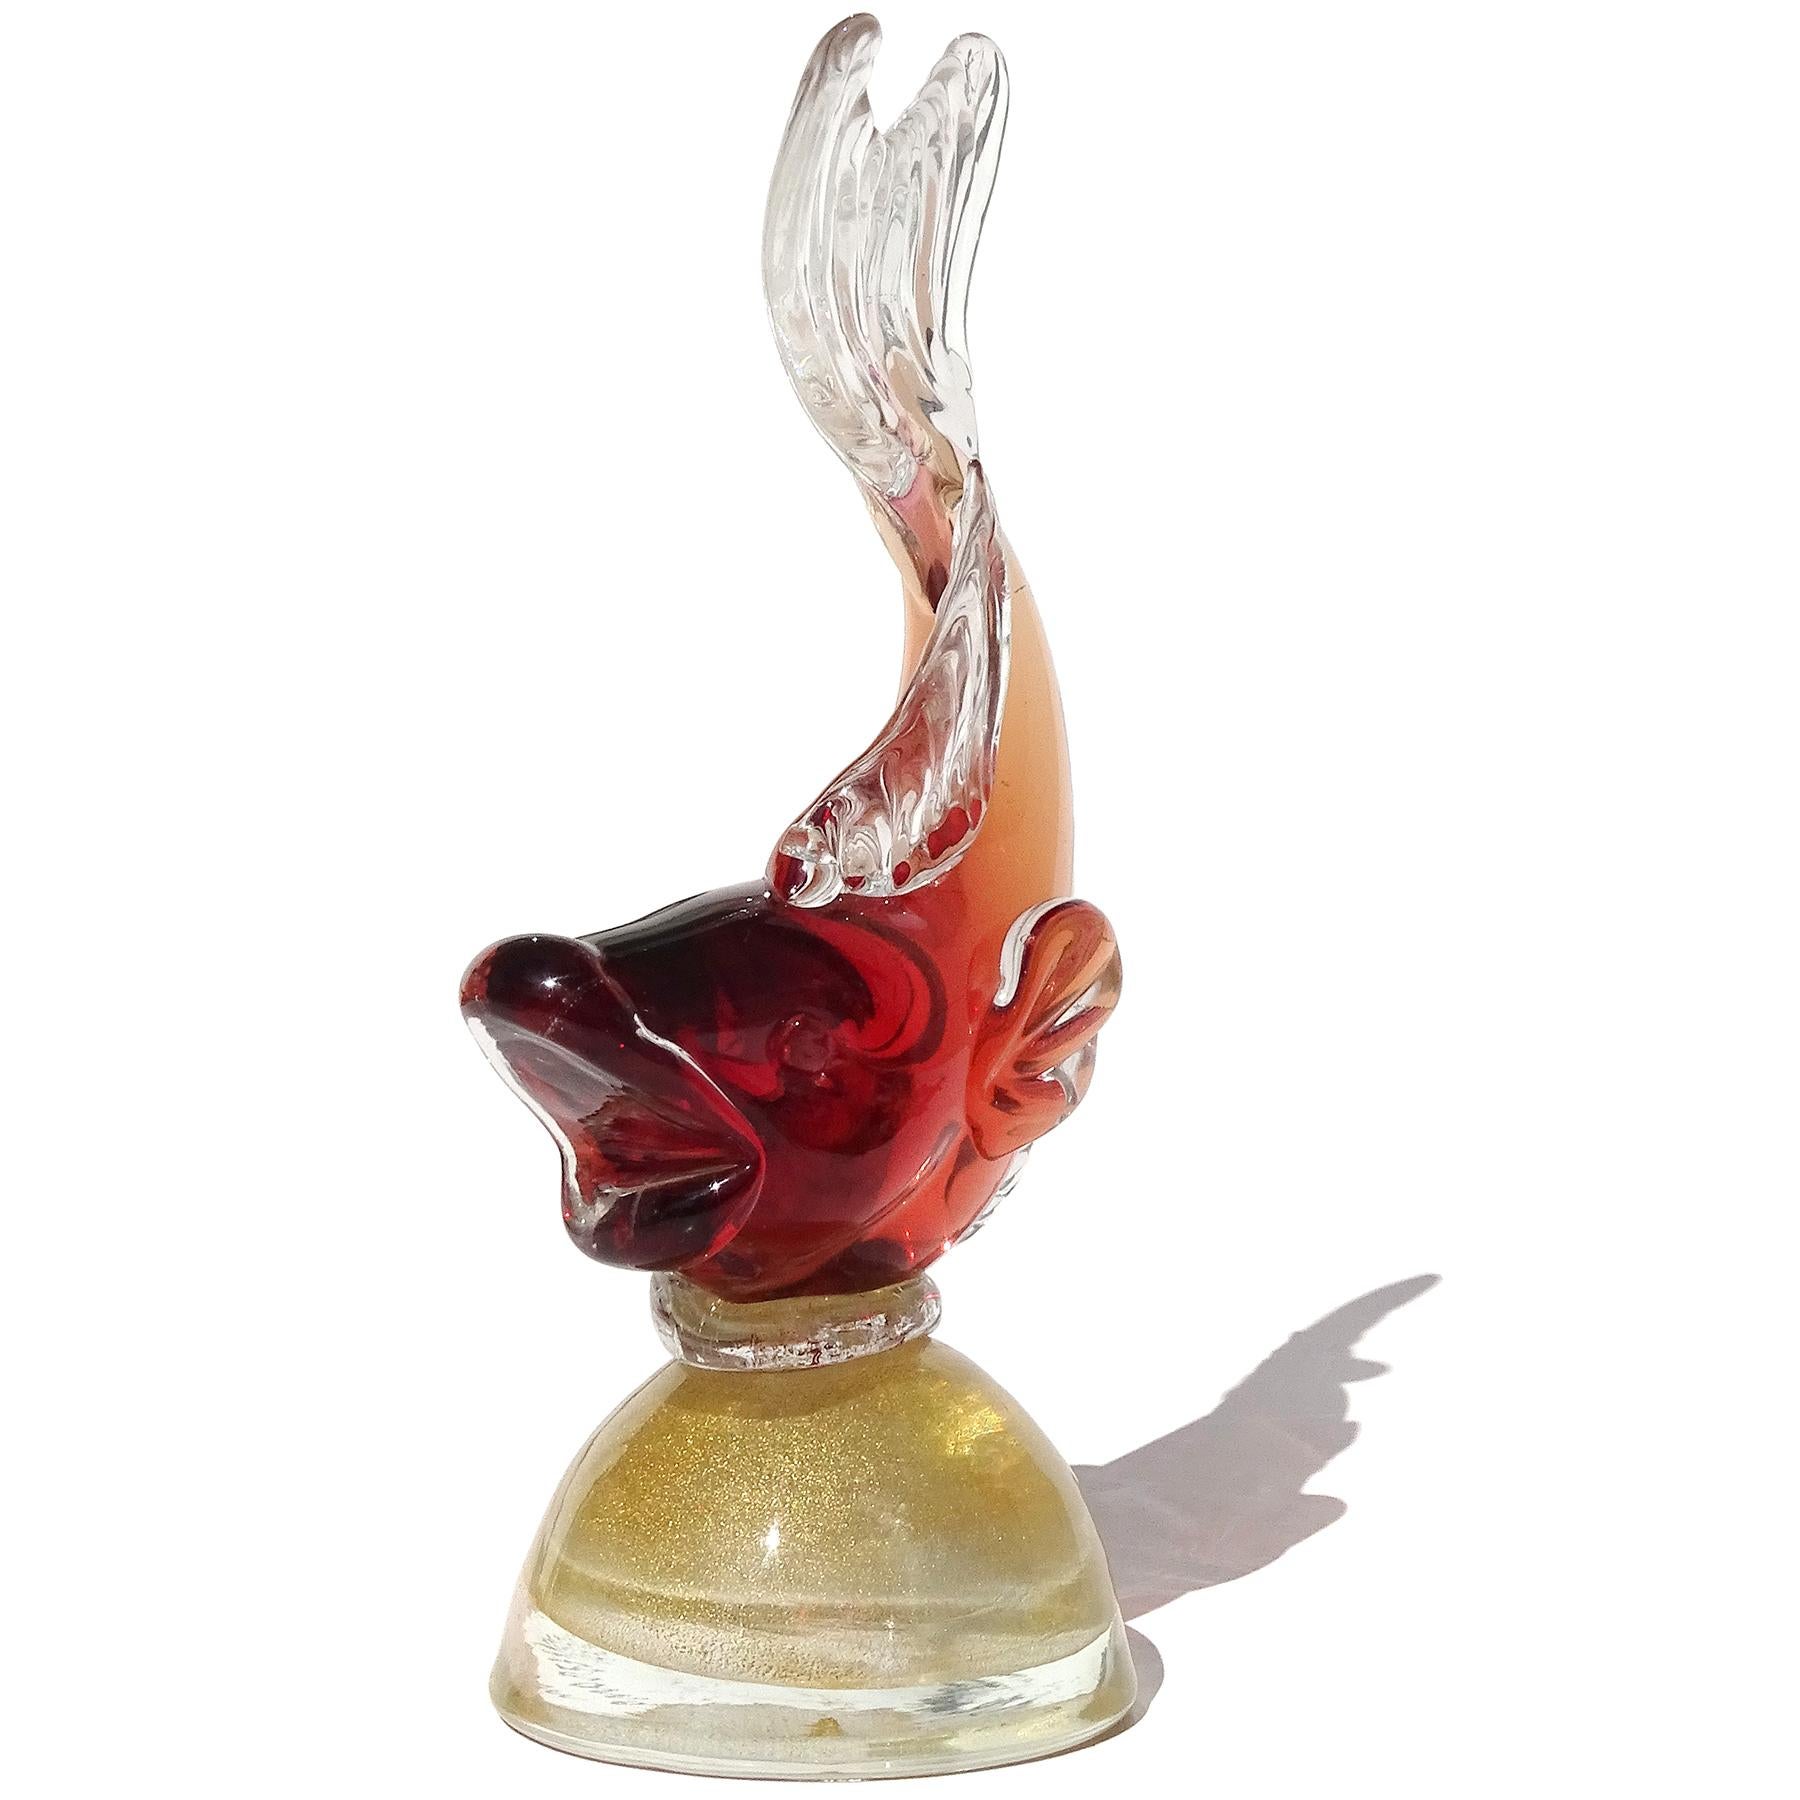 Beautiful vintage Murano hand blown Sommerso red and gold flecks Italian art glass fish sculpture on pedestal. Documented to Master glass artist and designer Alfredo Barbini, circa 1950-60s. The piece is actually signed underneath 